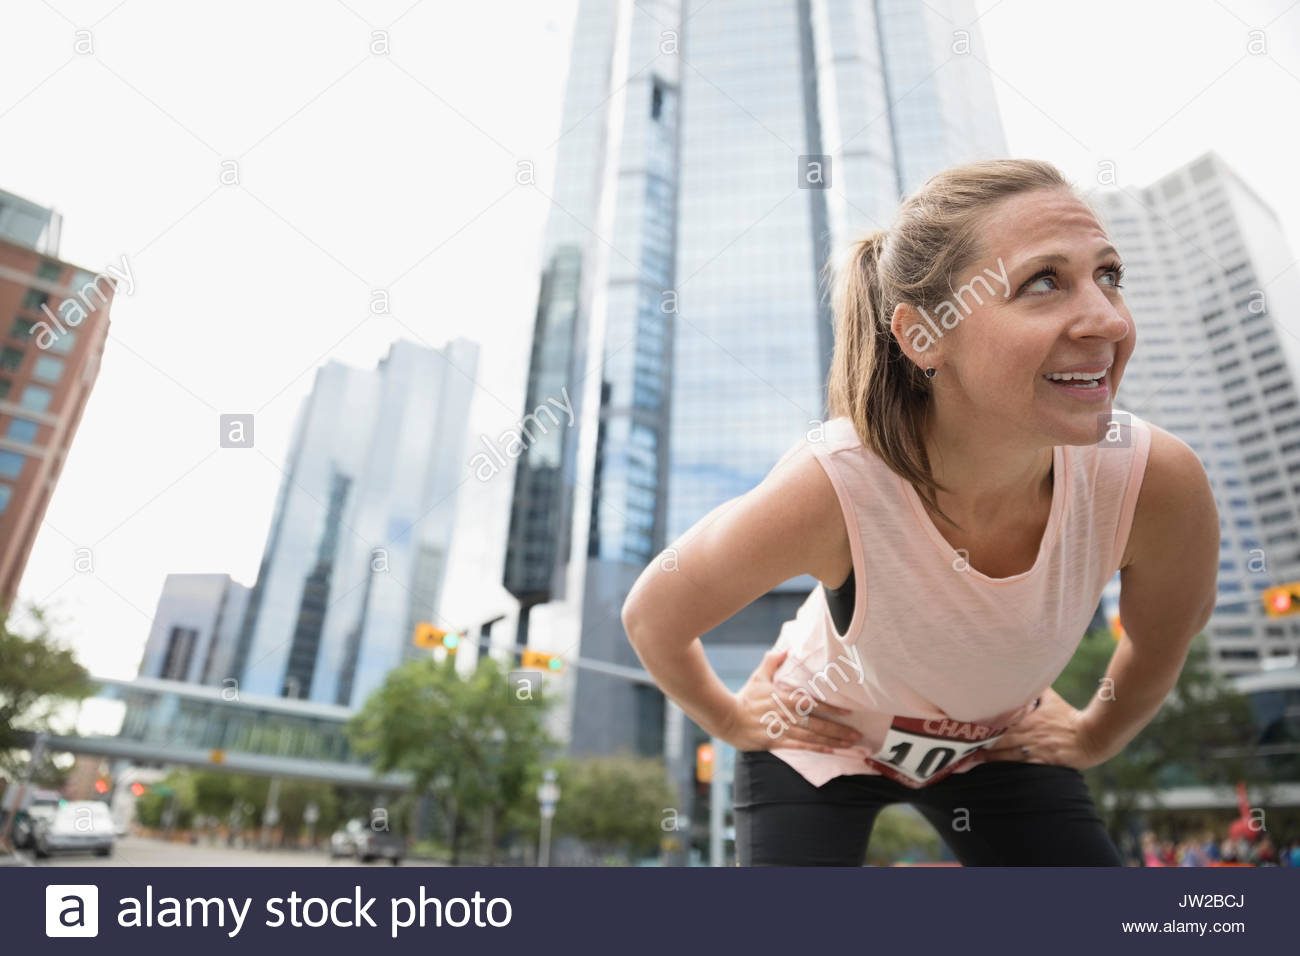 Female runner resting with hands on hips on urban street Stock Photo